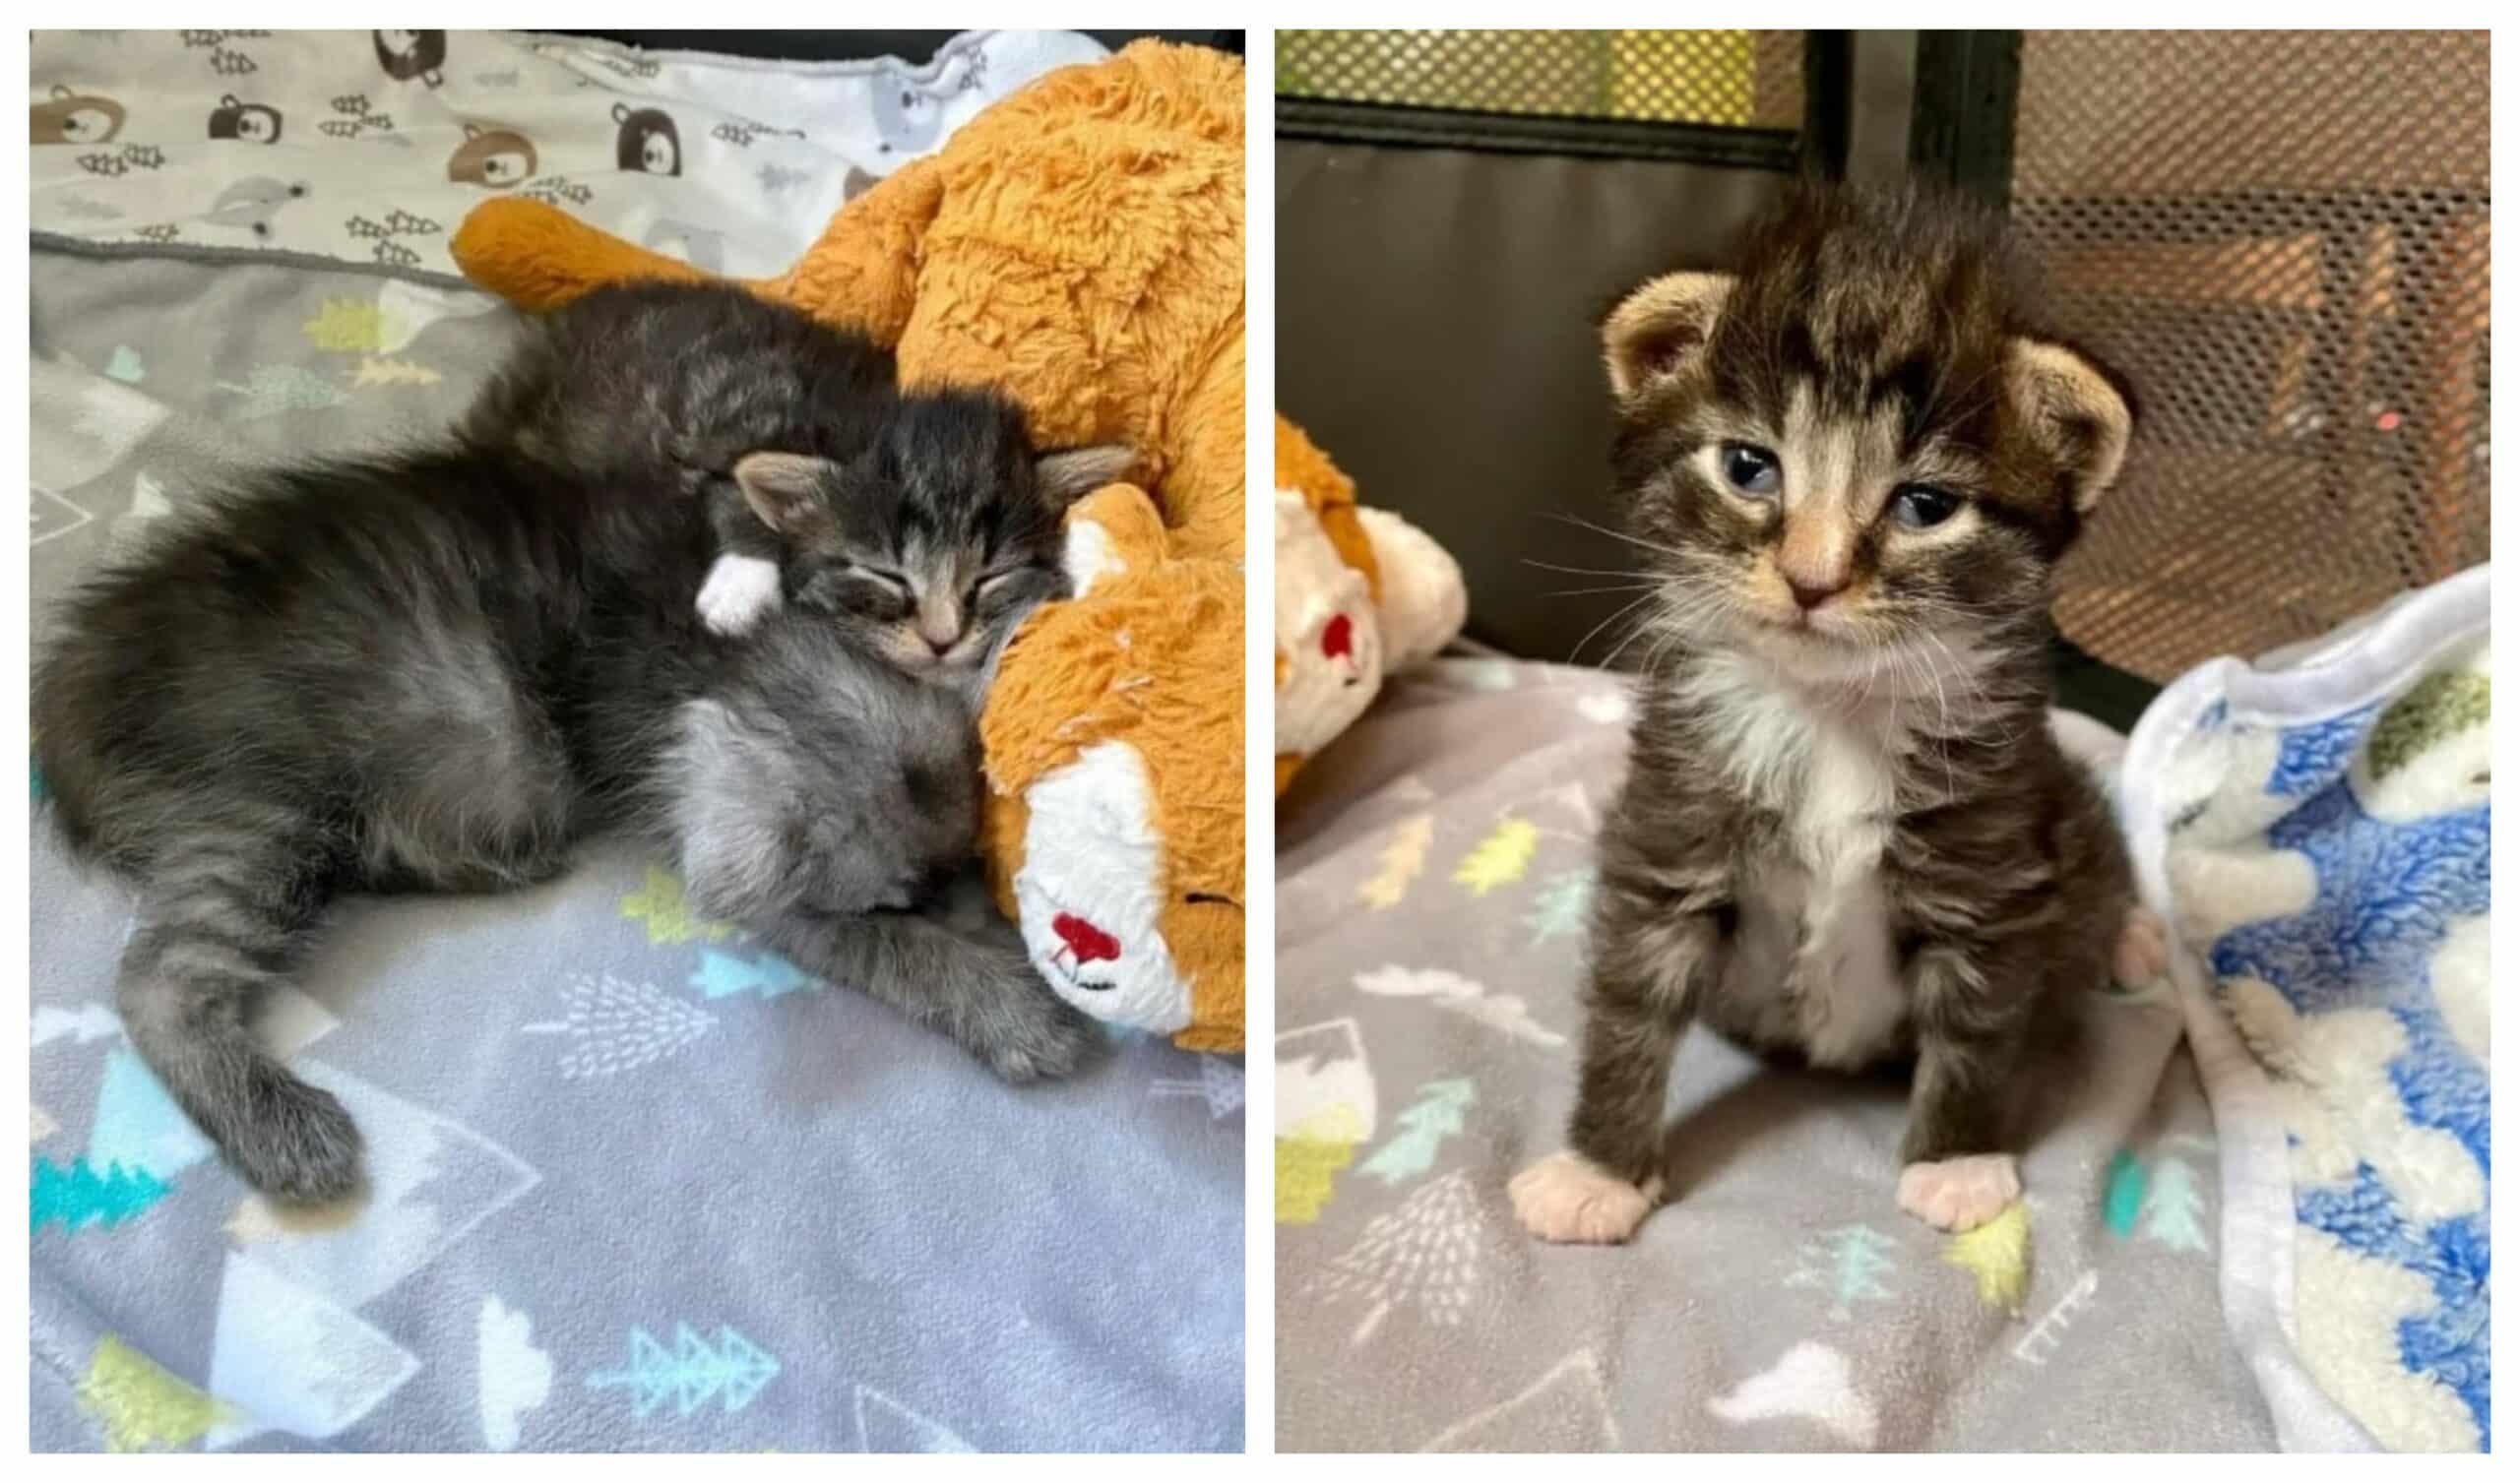 Two kittens were saved and developed a lifelong bond